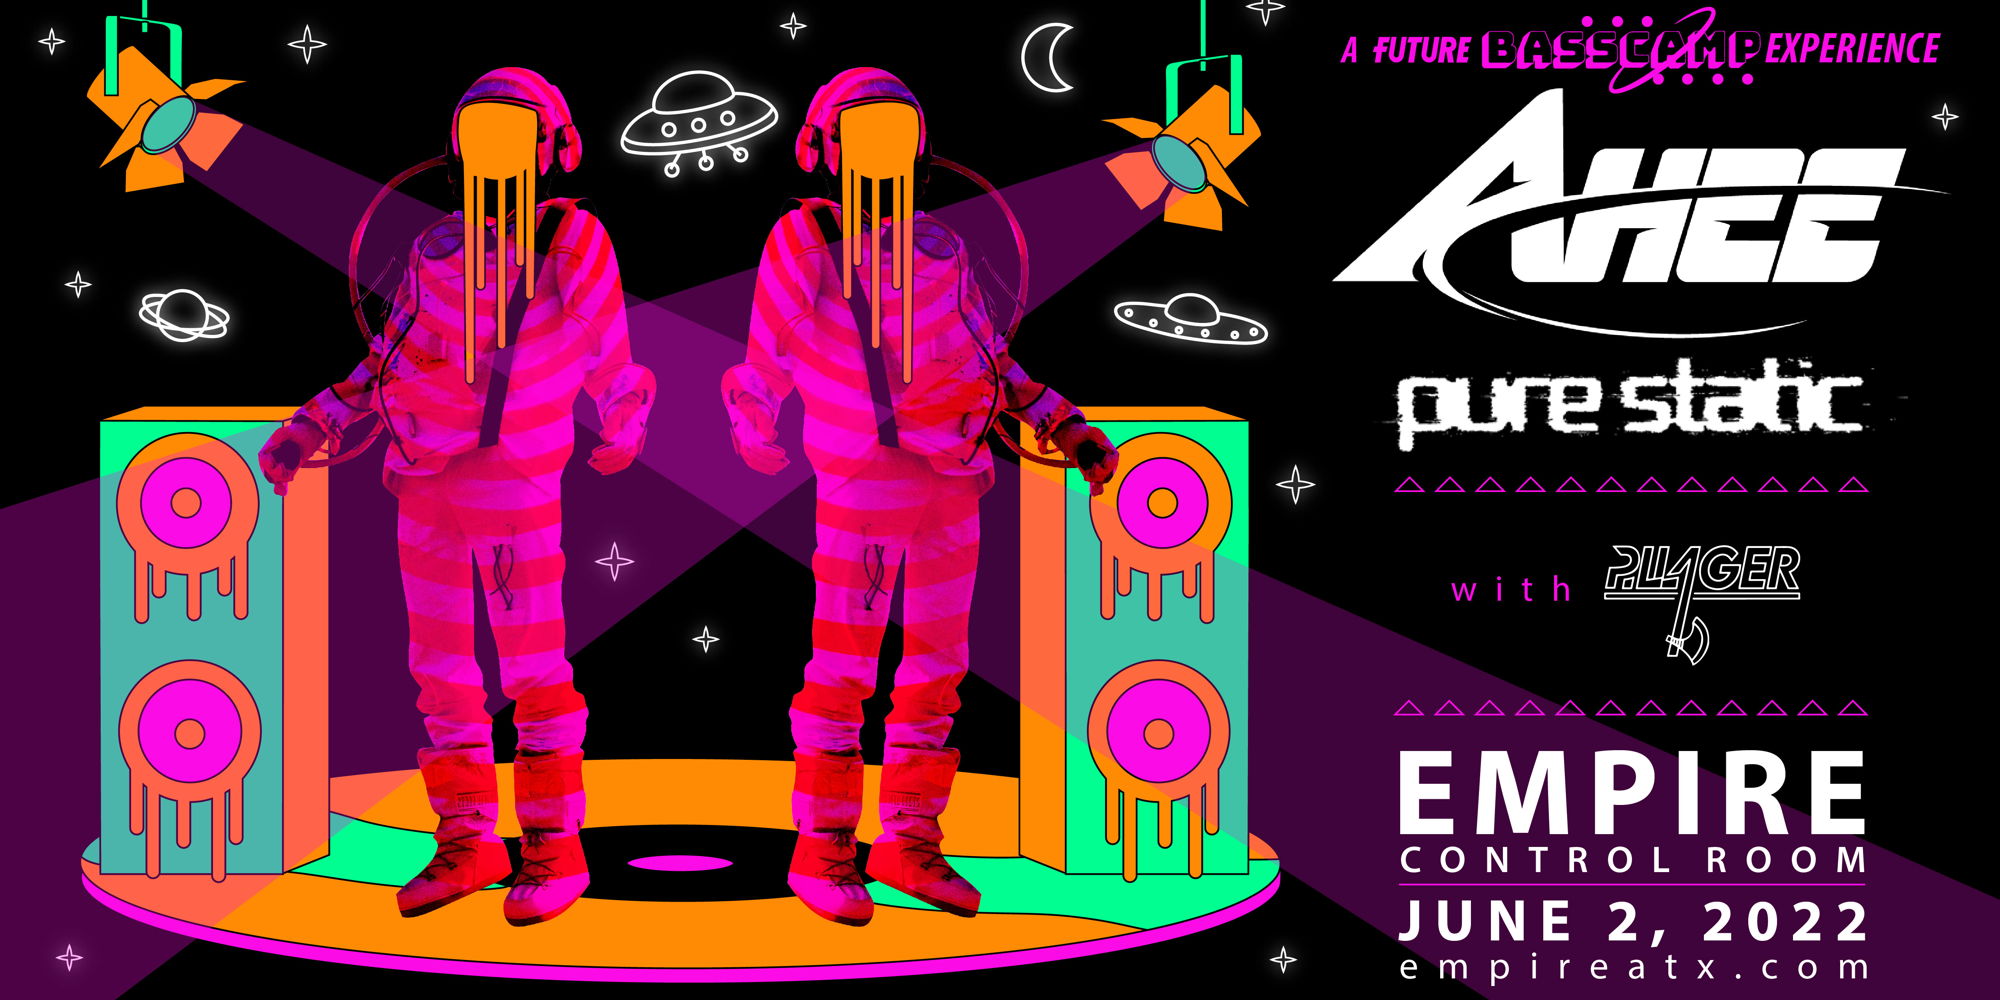 Future BassCamp Presents: Ahee w/ Pure Static and Pillager at Empire Control Room - 6/2  promotional image